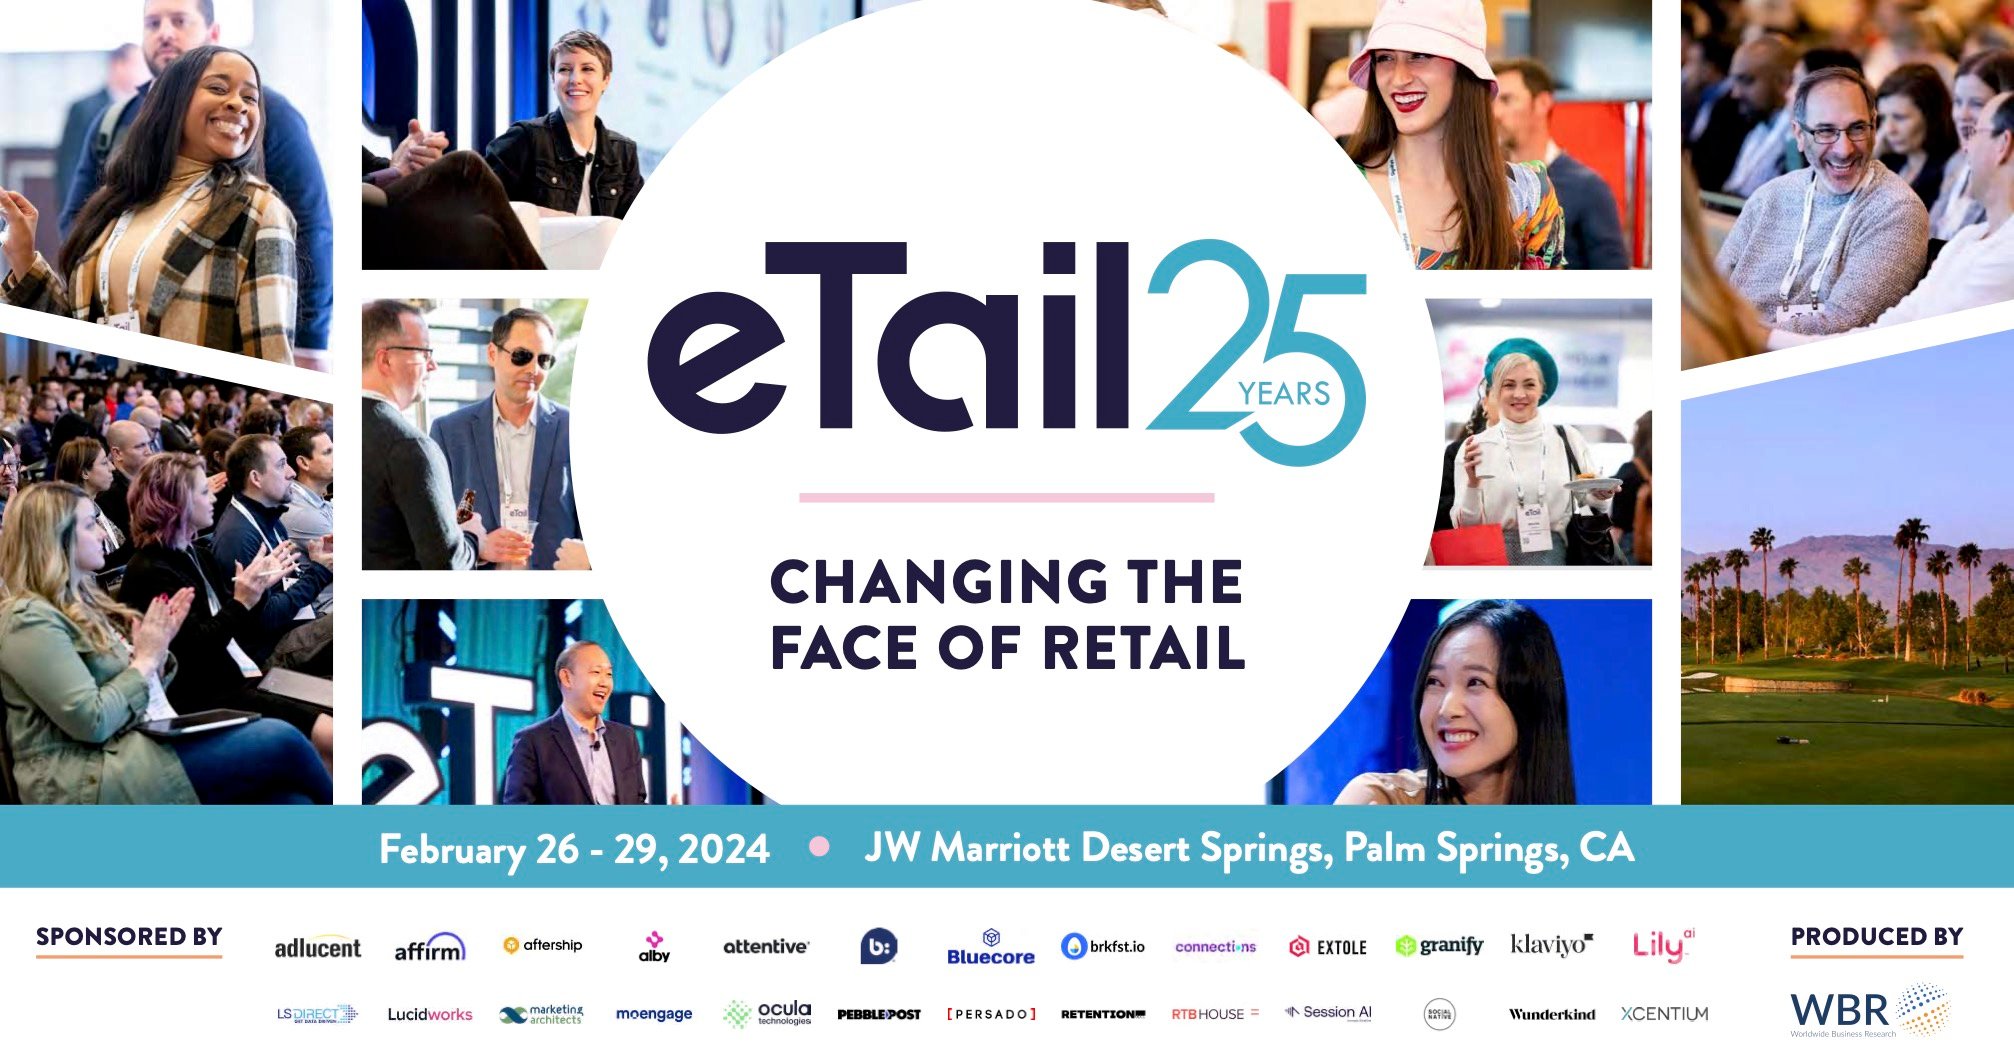 Your Guide to eTail West 2024 in Palm Springs, CA: Event Tips & Tricks